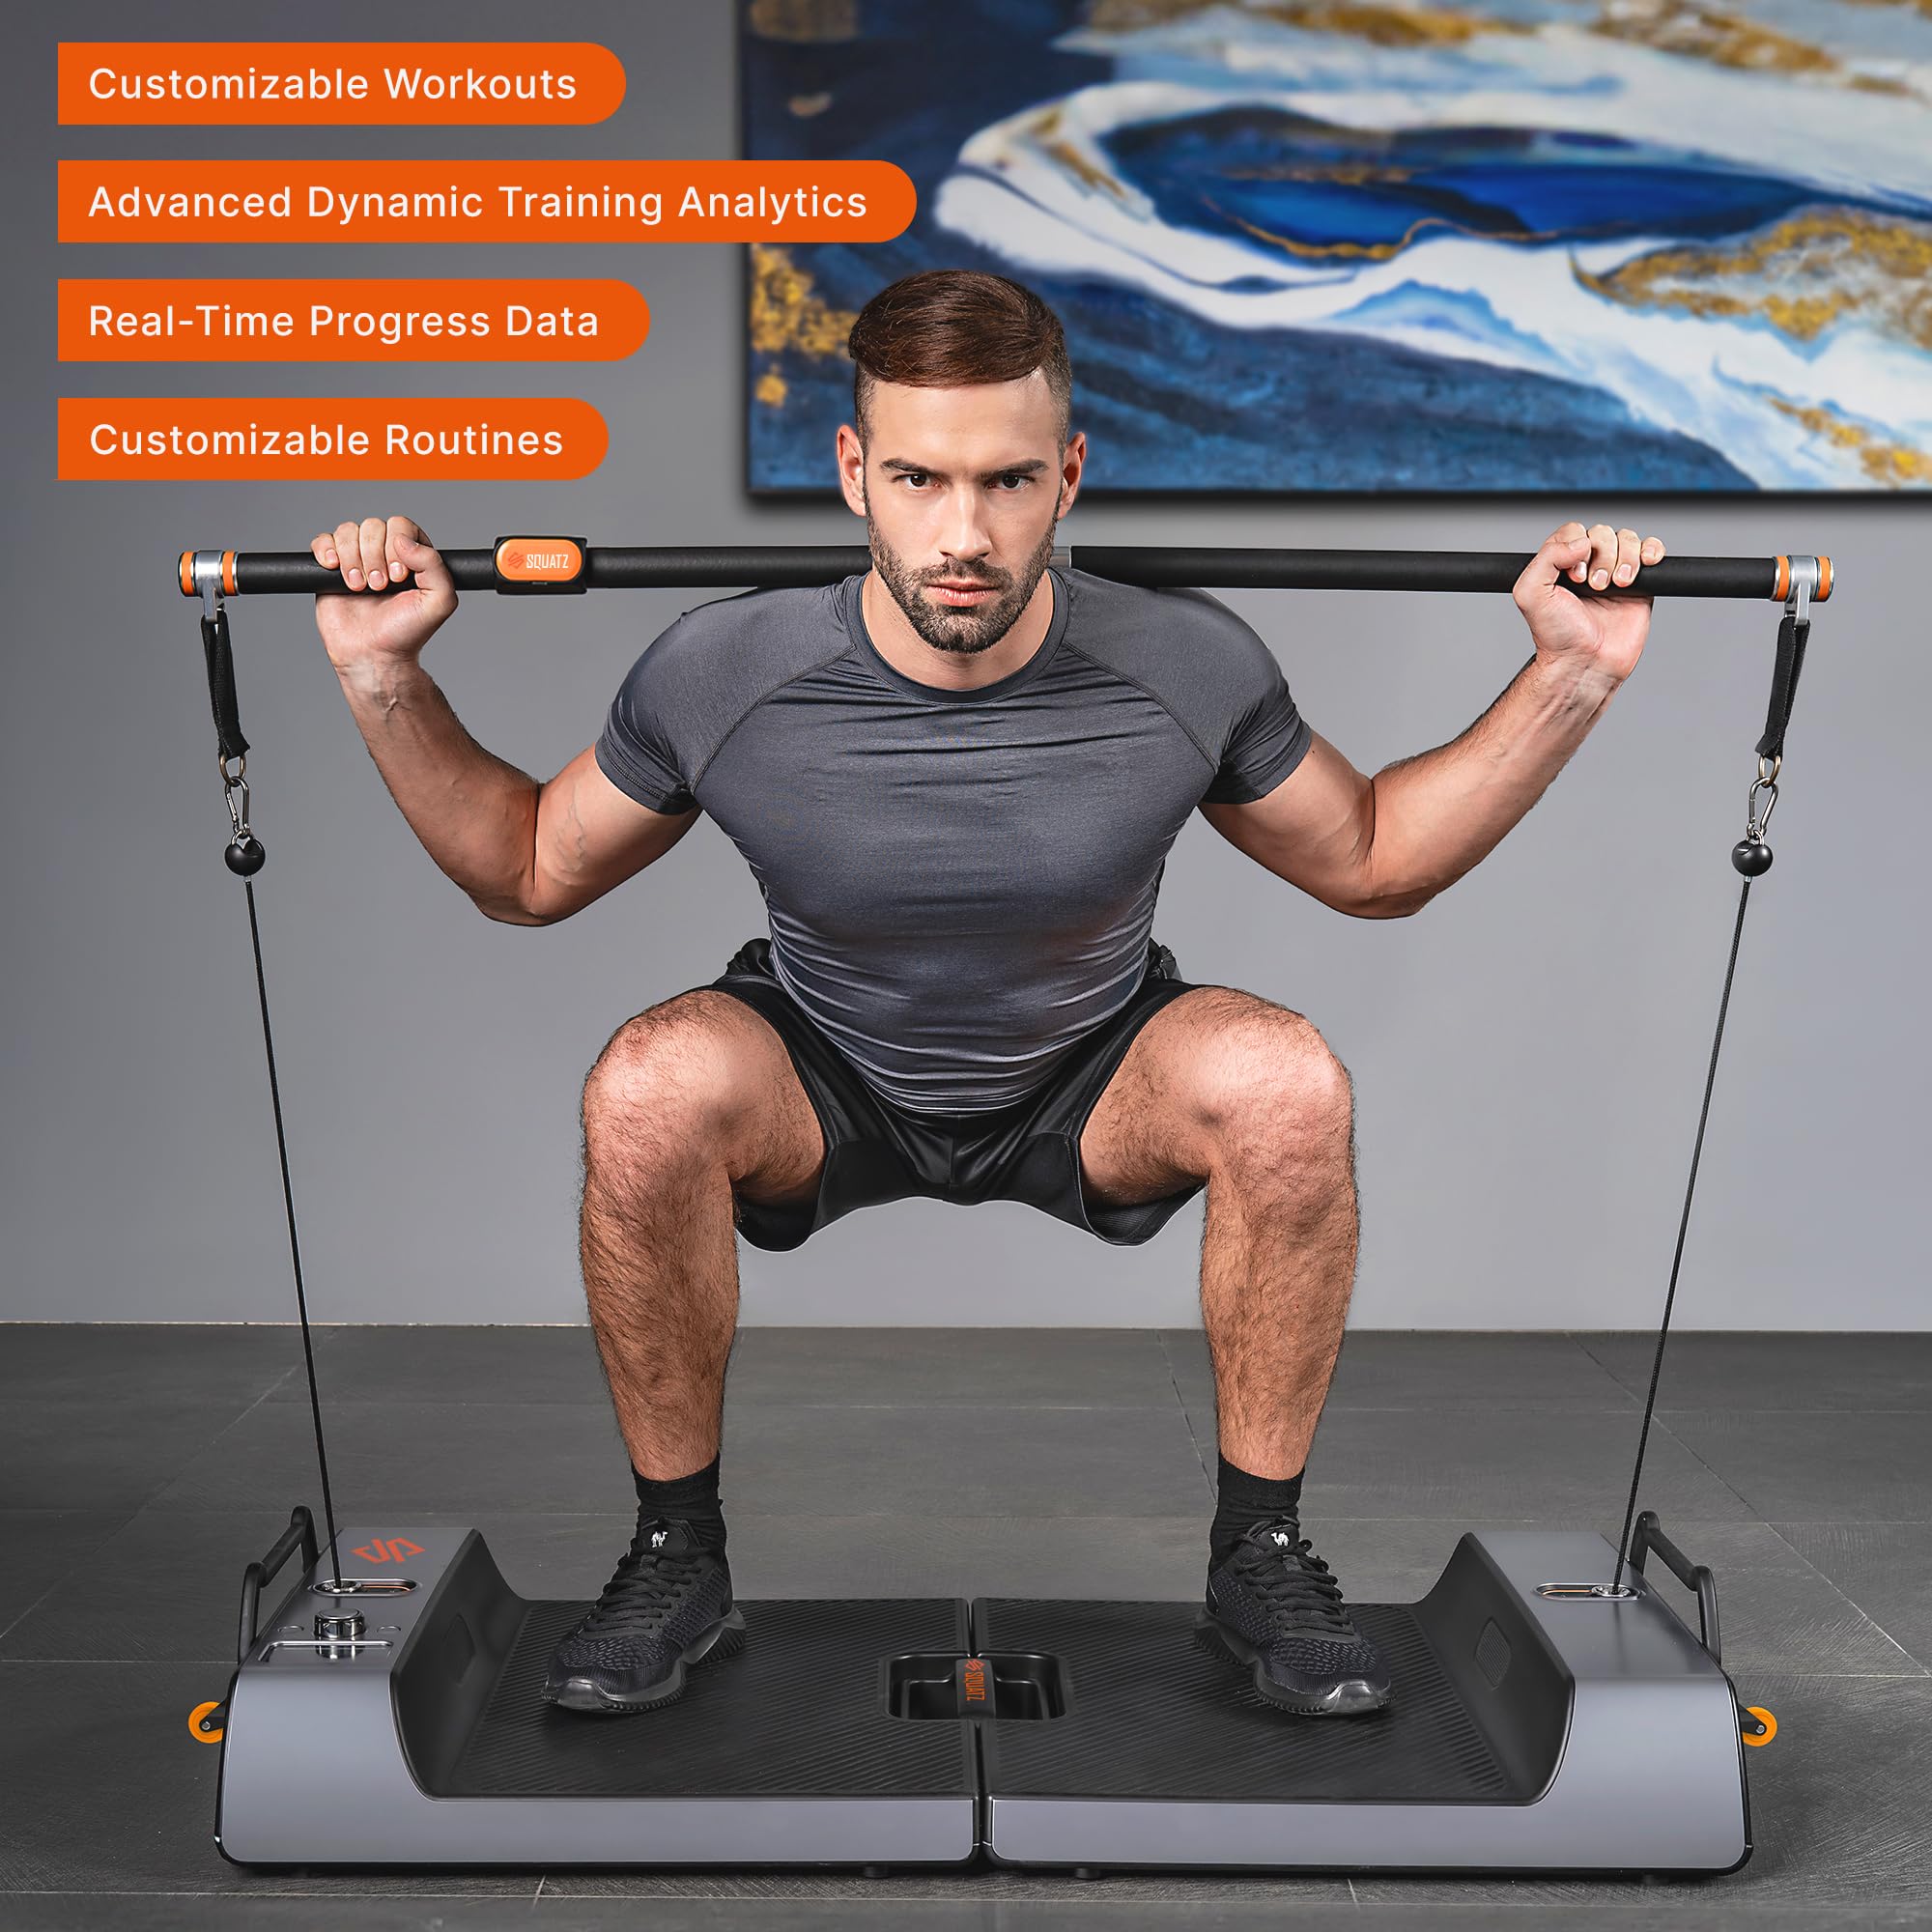 SQUATZ Apollo Board Gym, Version I 270 LBS Resistance, Foldable Multifunctional Workout Device with Standard, Eccentric, and Isokinetic Training Modes, Home Gym Equipment For Full Body Workouts